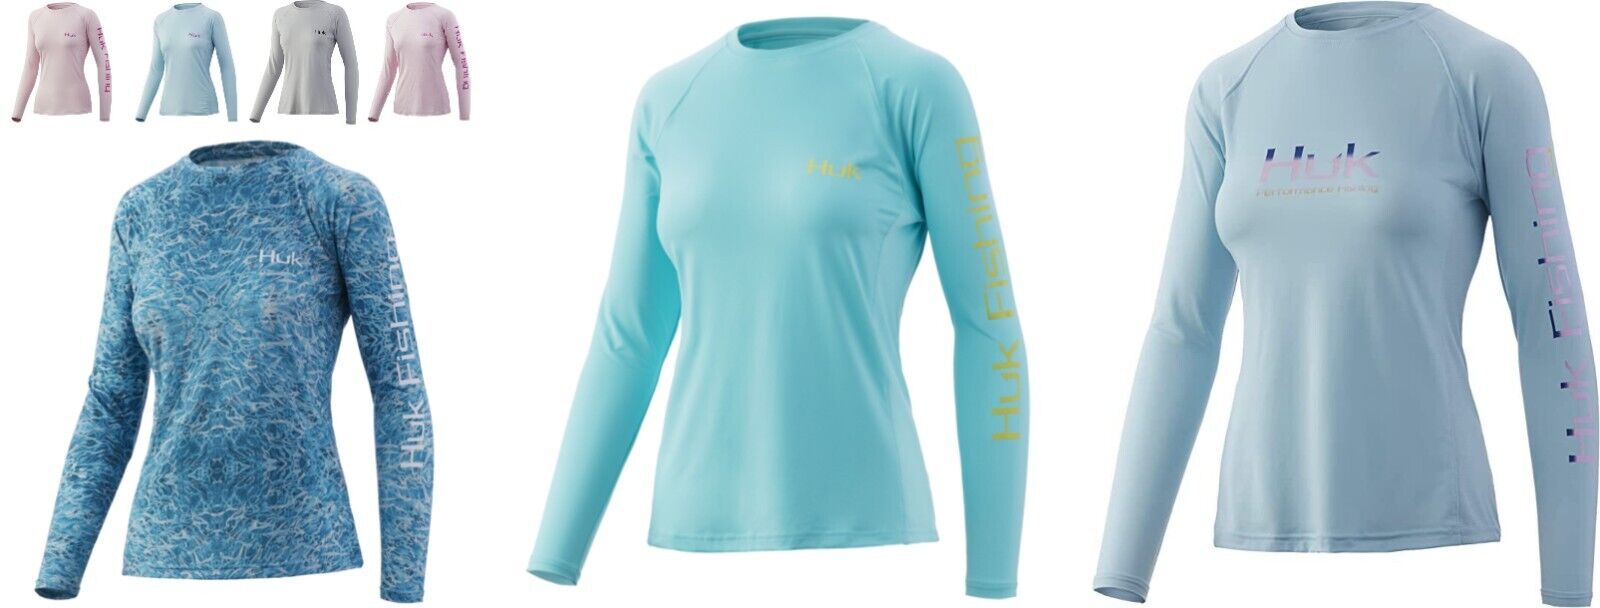 HUK Womens Pursuit Style Long Sleeve Shirts CHOOSE YOUR COLOR AND SIZE!